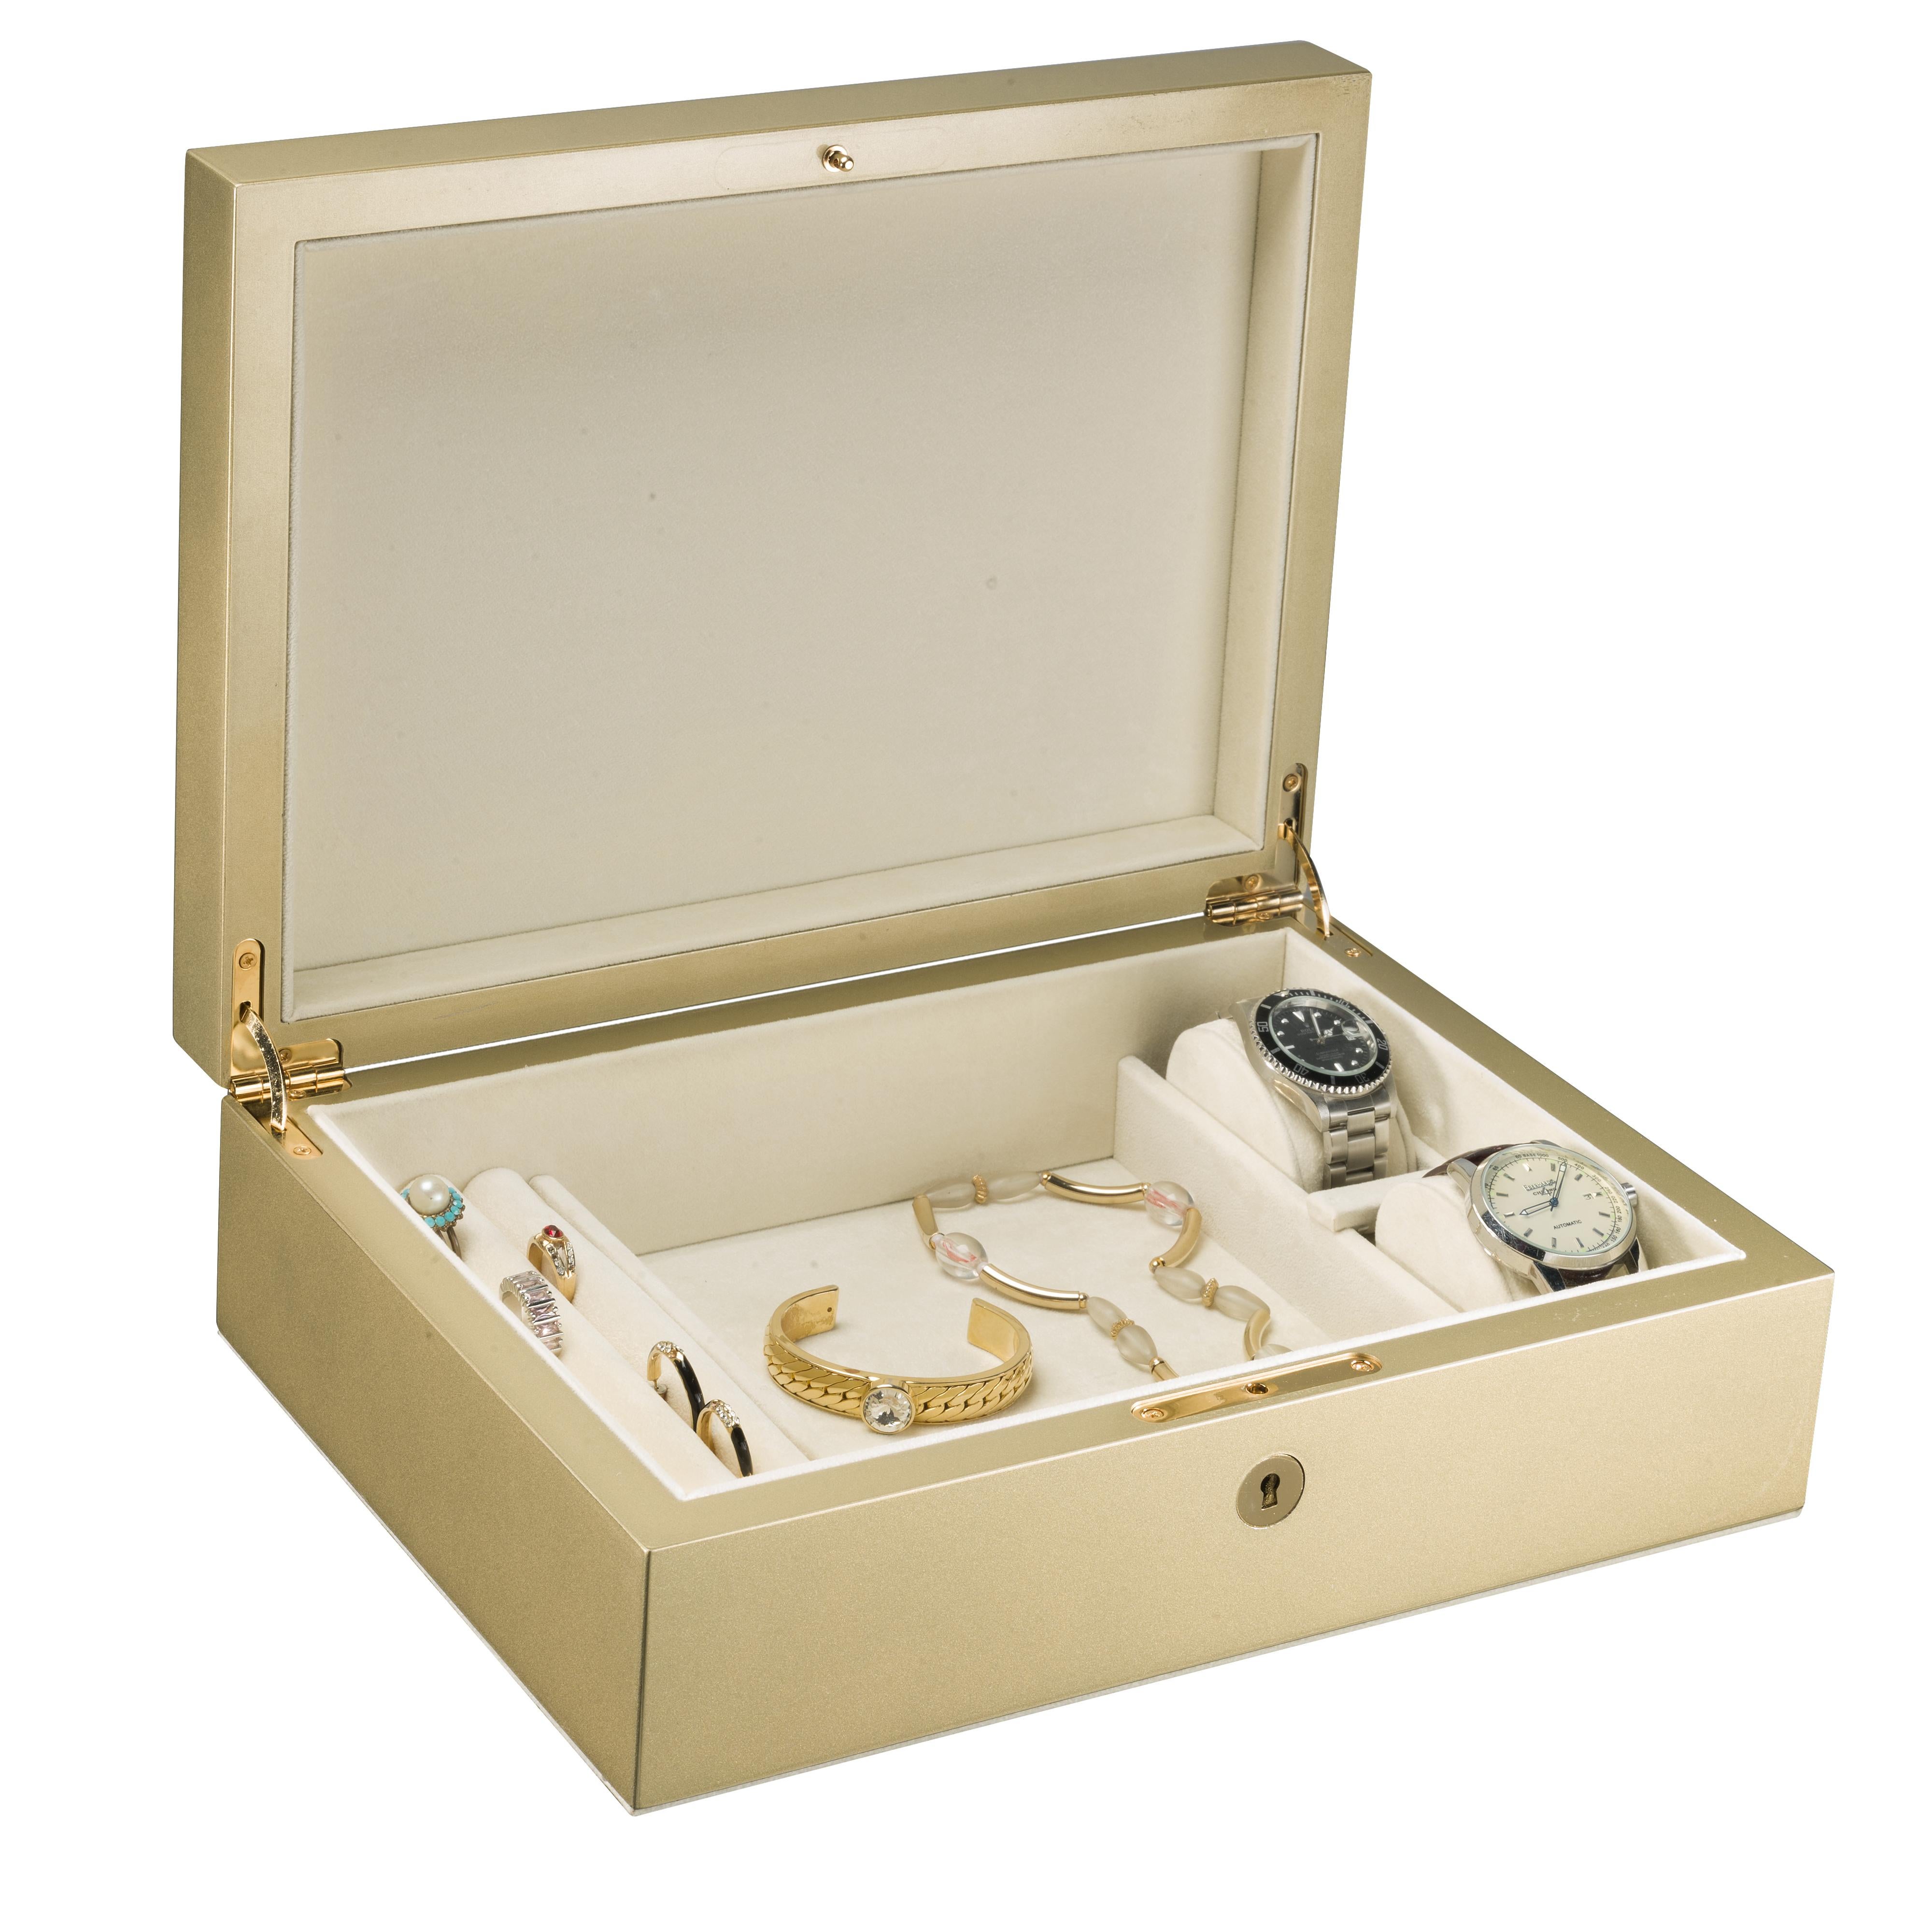 This jewelry box is part of the Firenze Collection of refined, wood-handcrafted objets d'art. Featured in a delicate champagne color enhanced with a polished polyester finish and gold-finished metal details, it will elegantly match any sophisticated